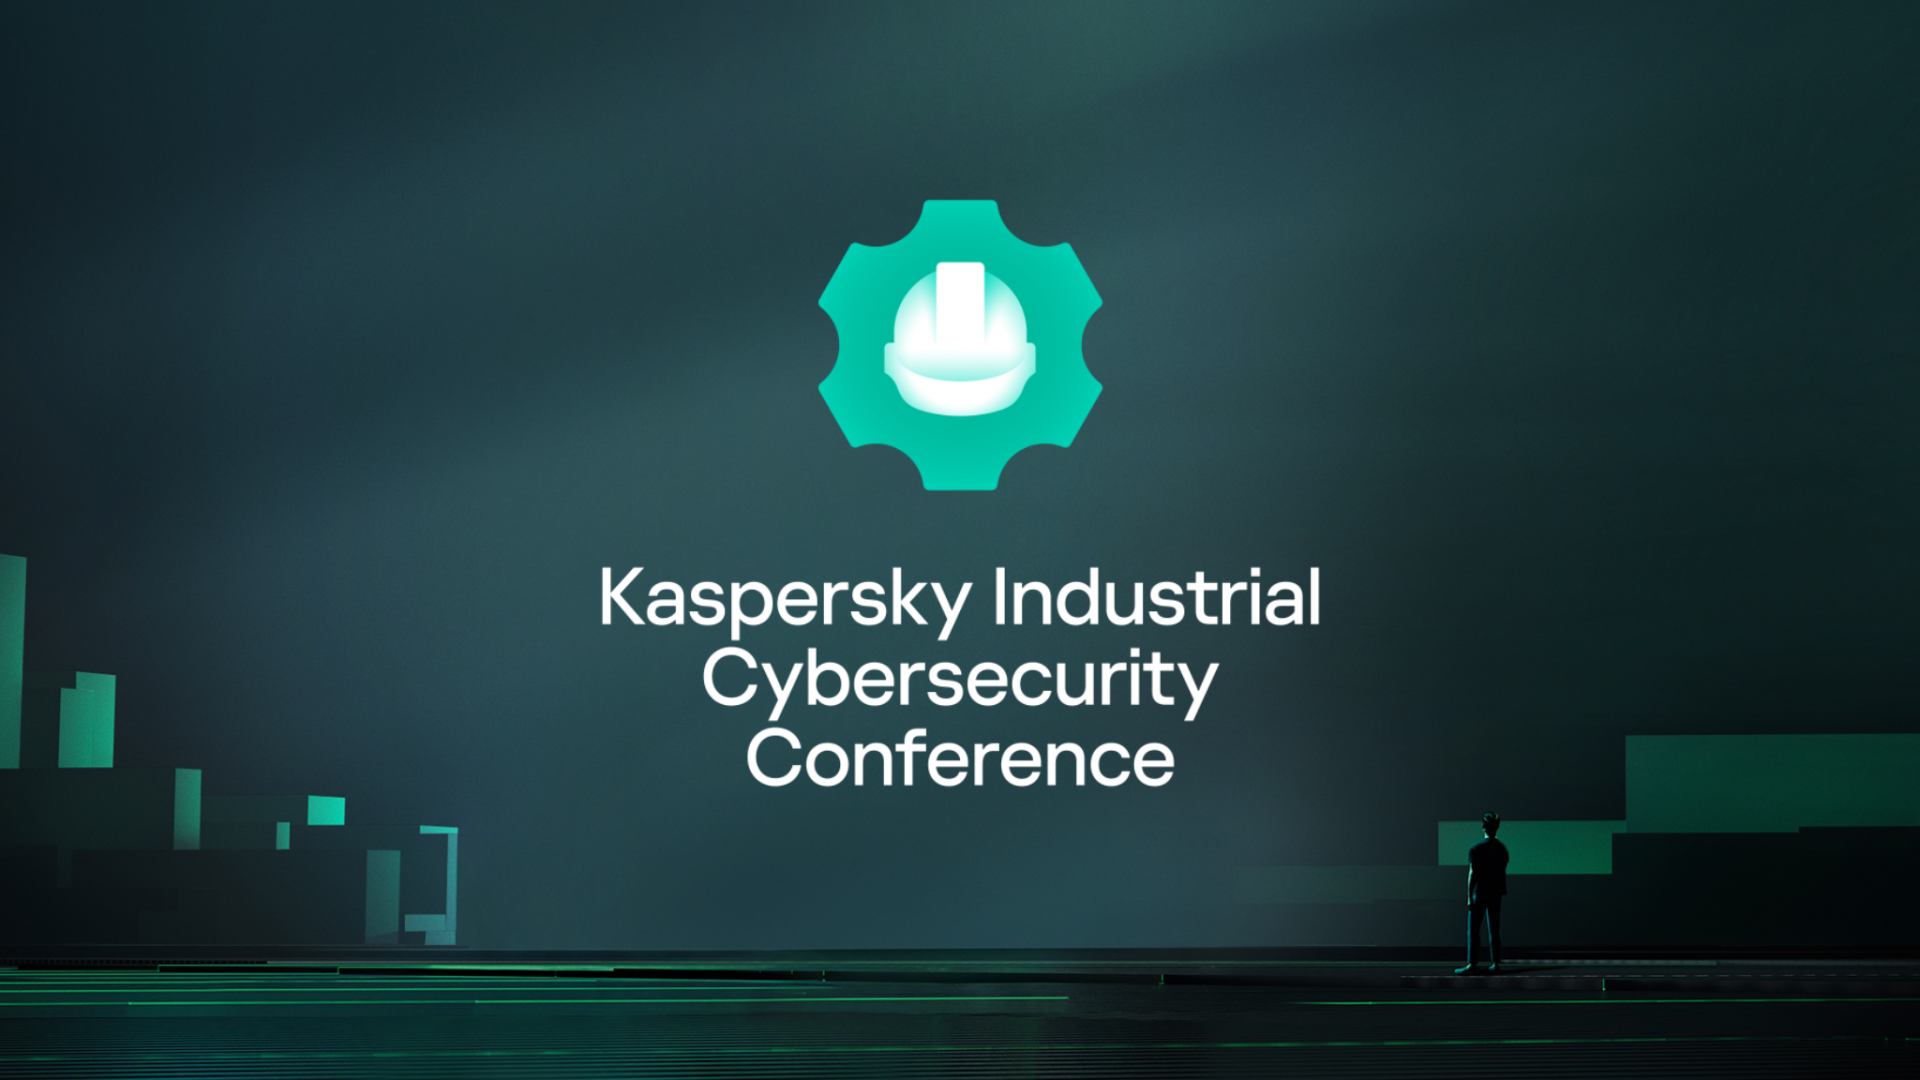 Kaspersky industrial cybersecurity for nodes. Kaspersky Industrial cybersecurity. Kaspersky Industrial cybersecurity логотип. Kaspersky Industrial cybersecurity по отраслям. Kaspersky Industrial cybersecurity Скриншоты.